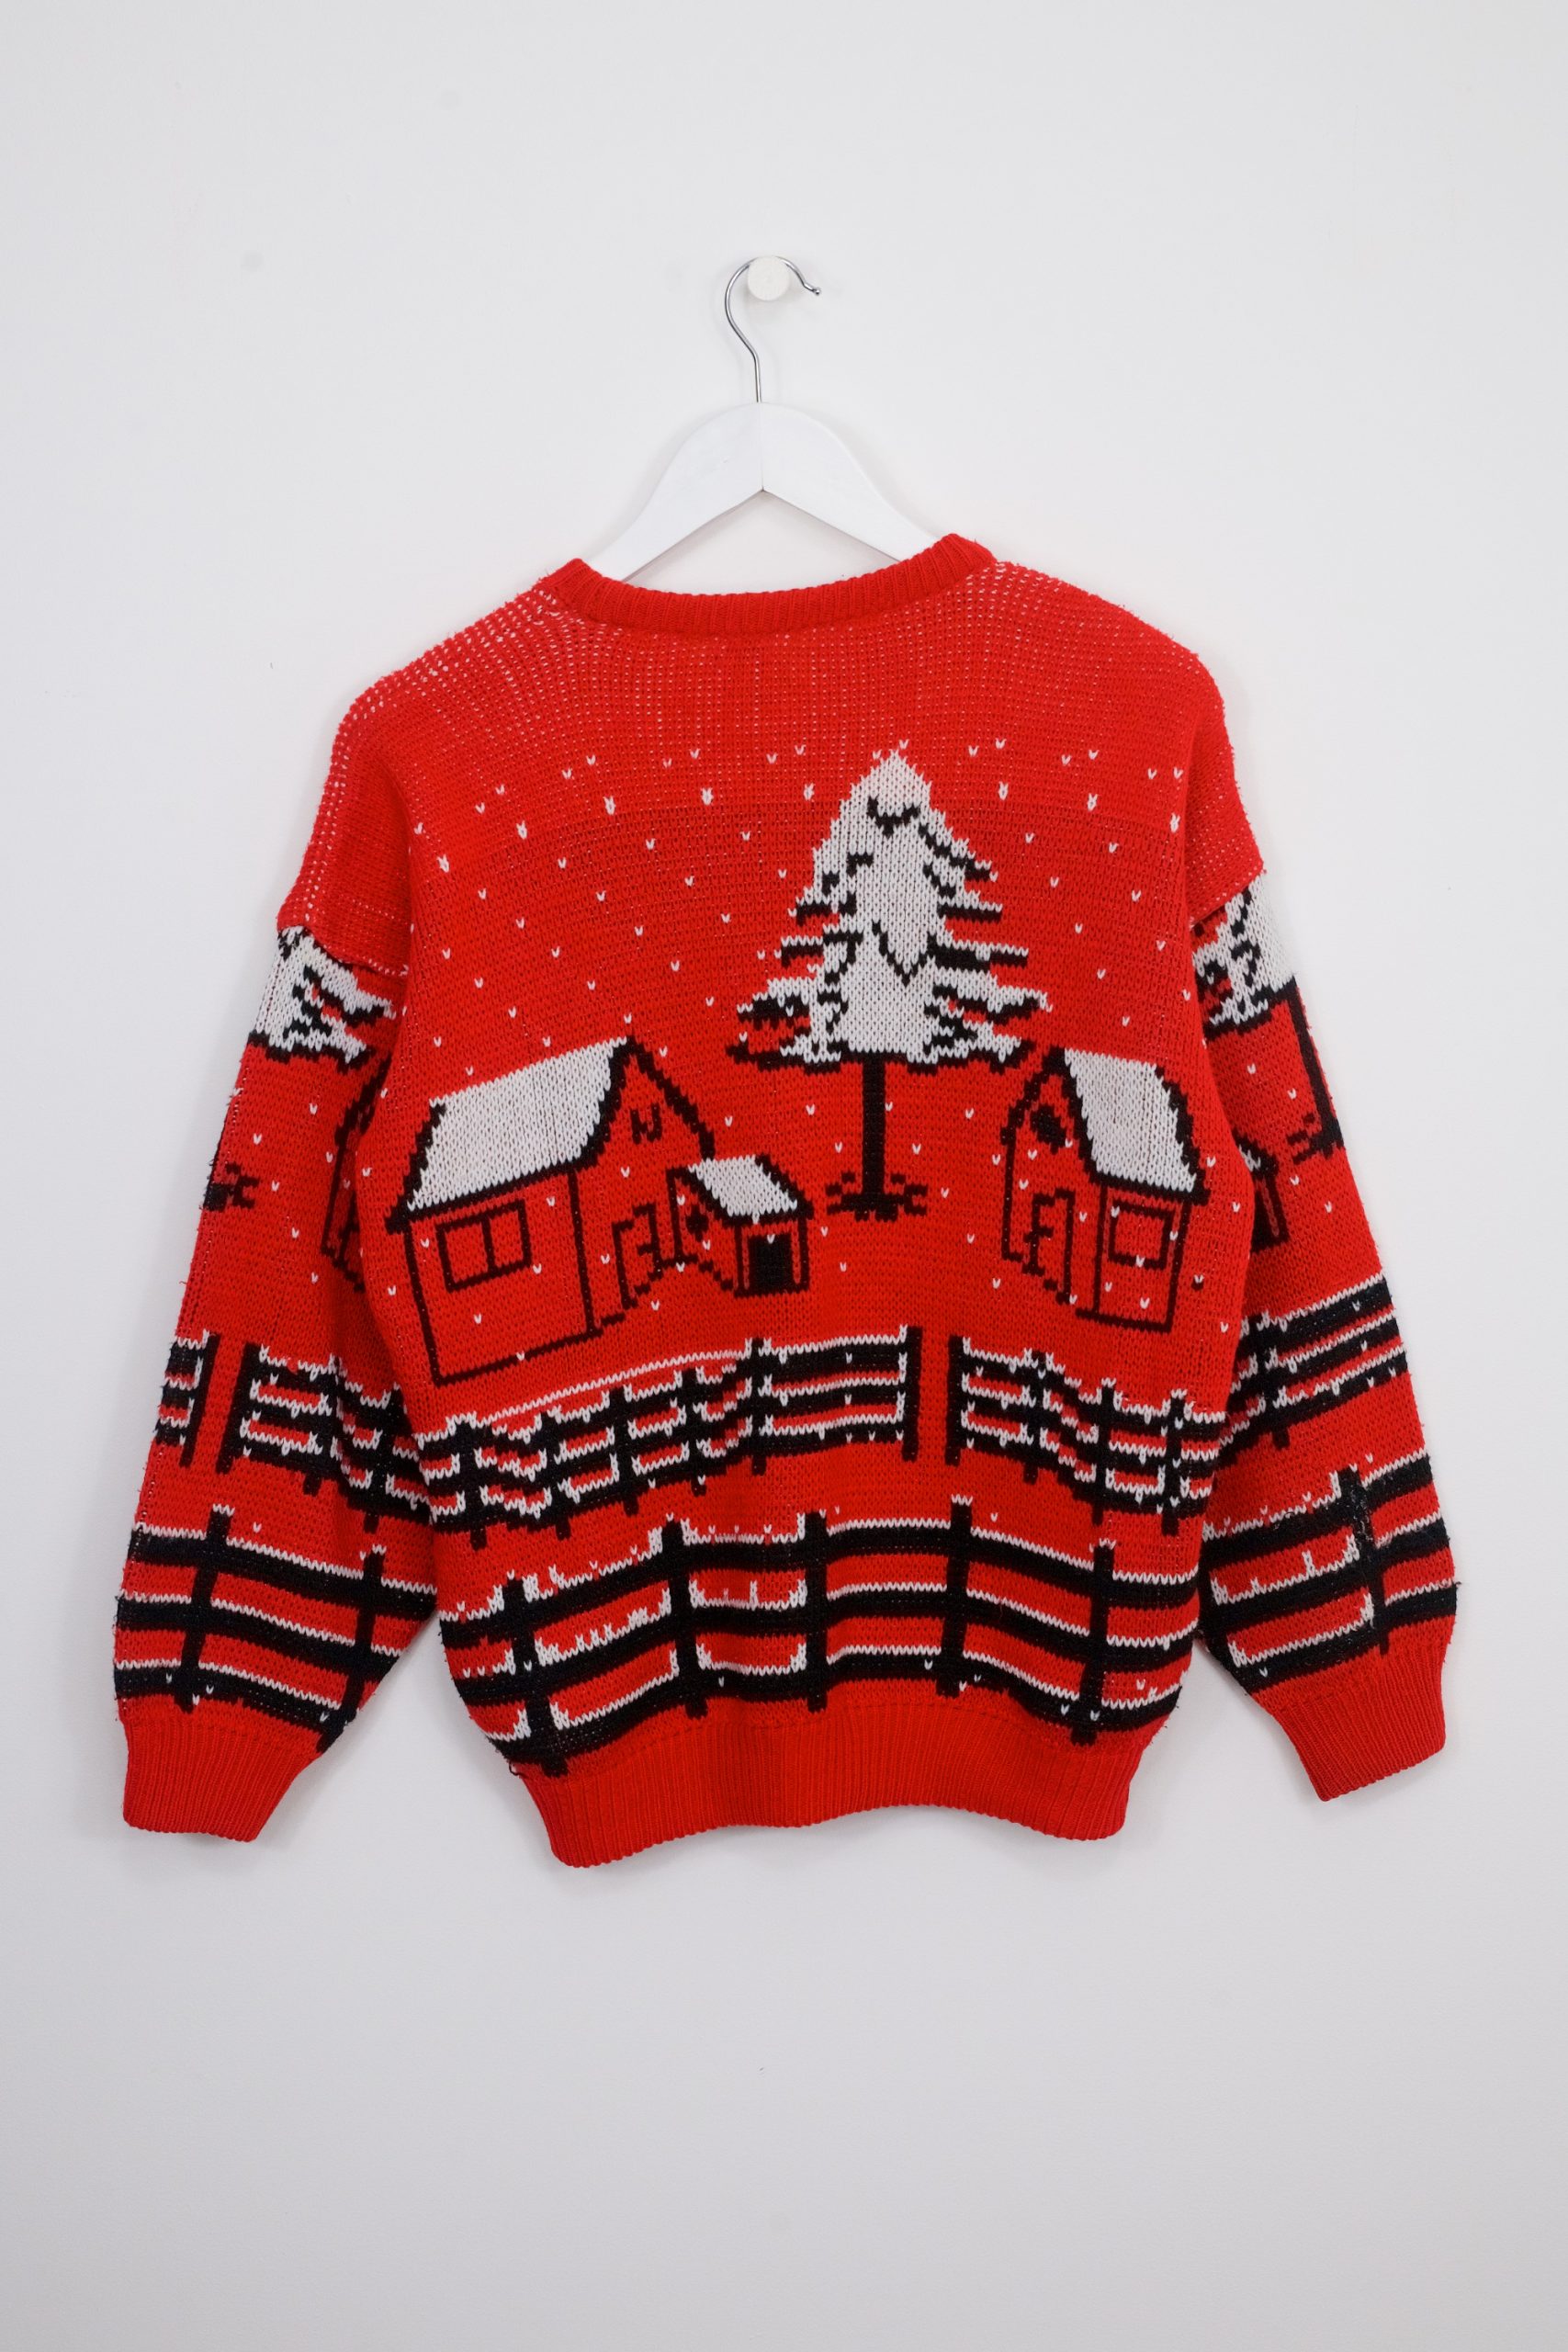 Snowy Countryside Christmas Jumper | Save the Children Shop